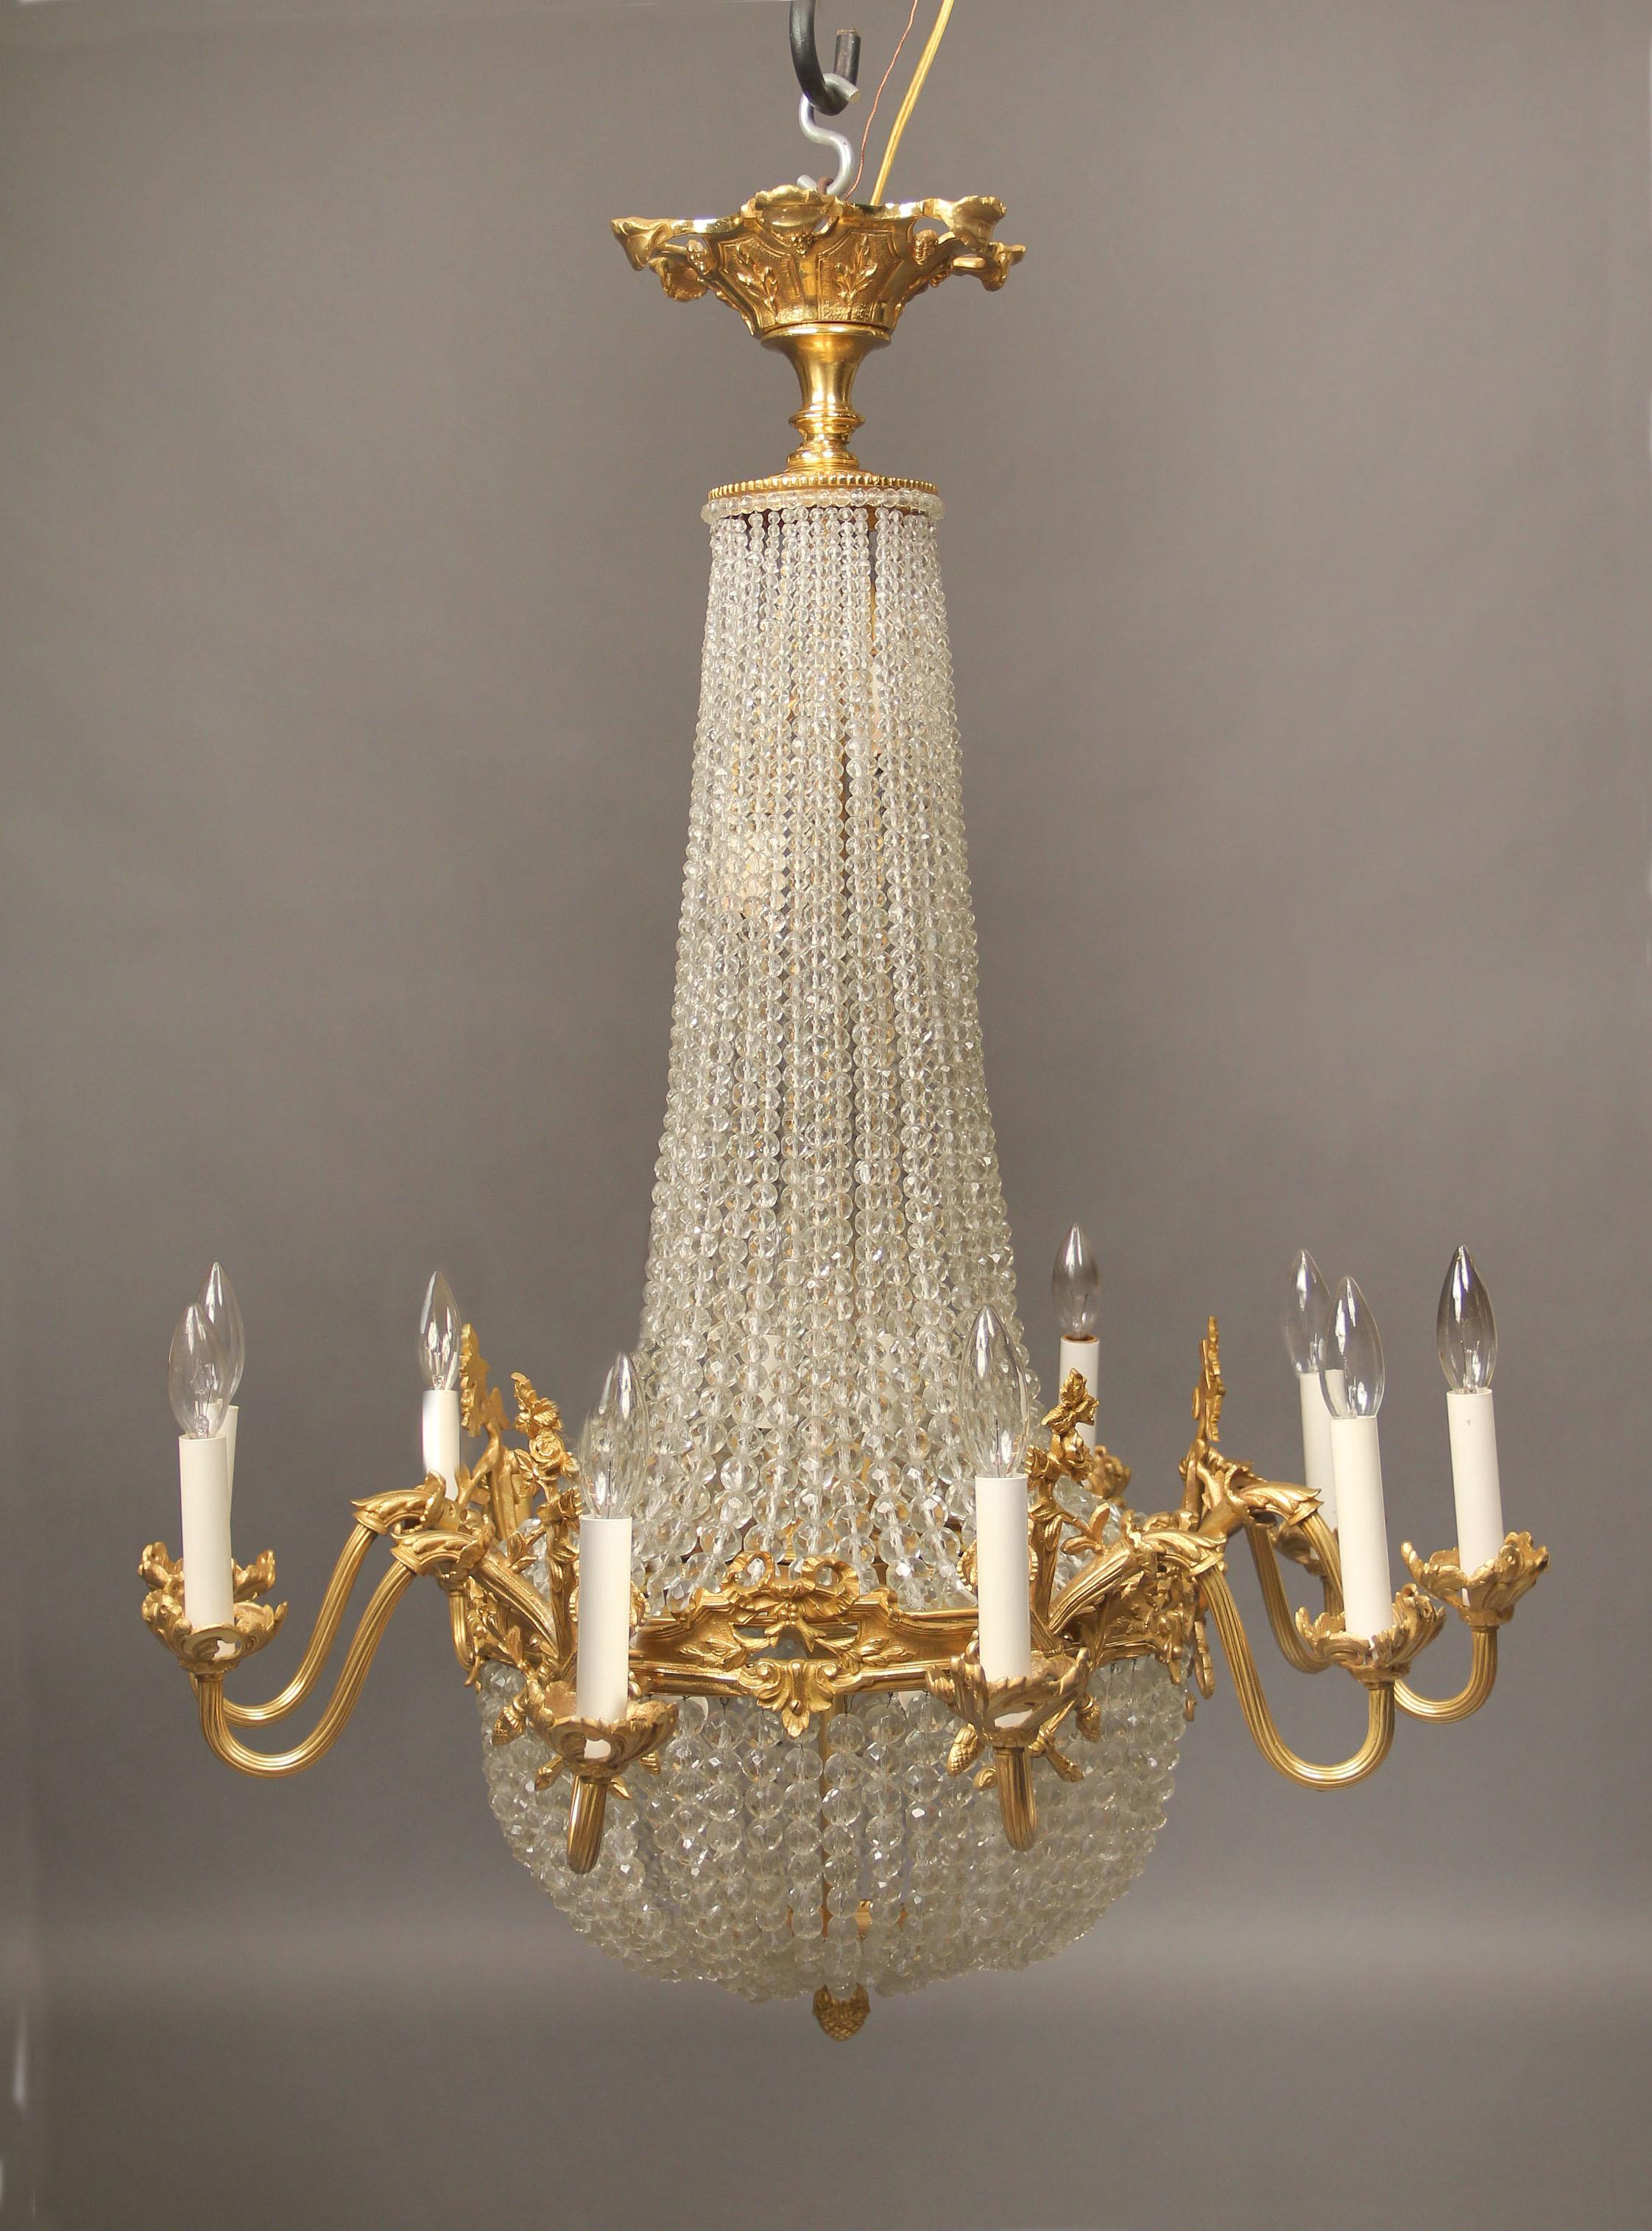 Late 19th Century Gilt Bronze and Beaded Crystal Basket Twenty Light Chandelier

Very finely casted bronze arms supporting ten perimeter lights, ten interior tiered lights.